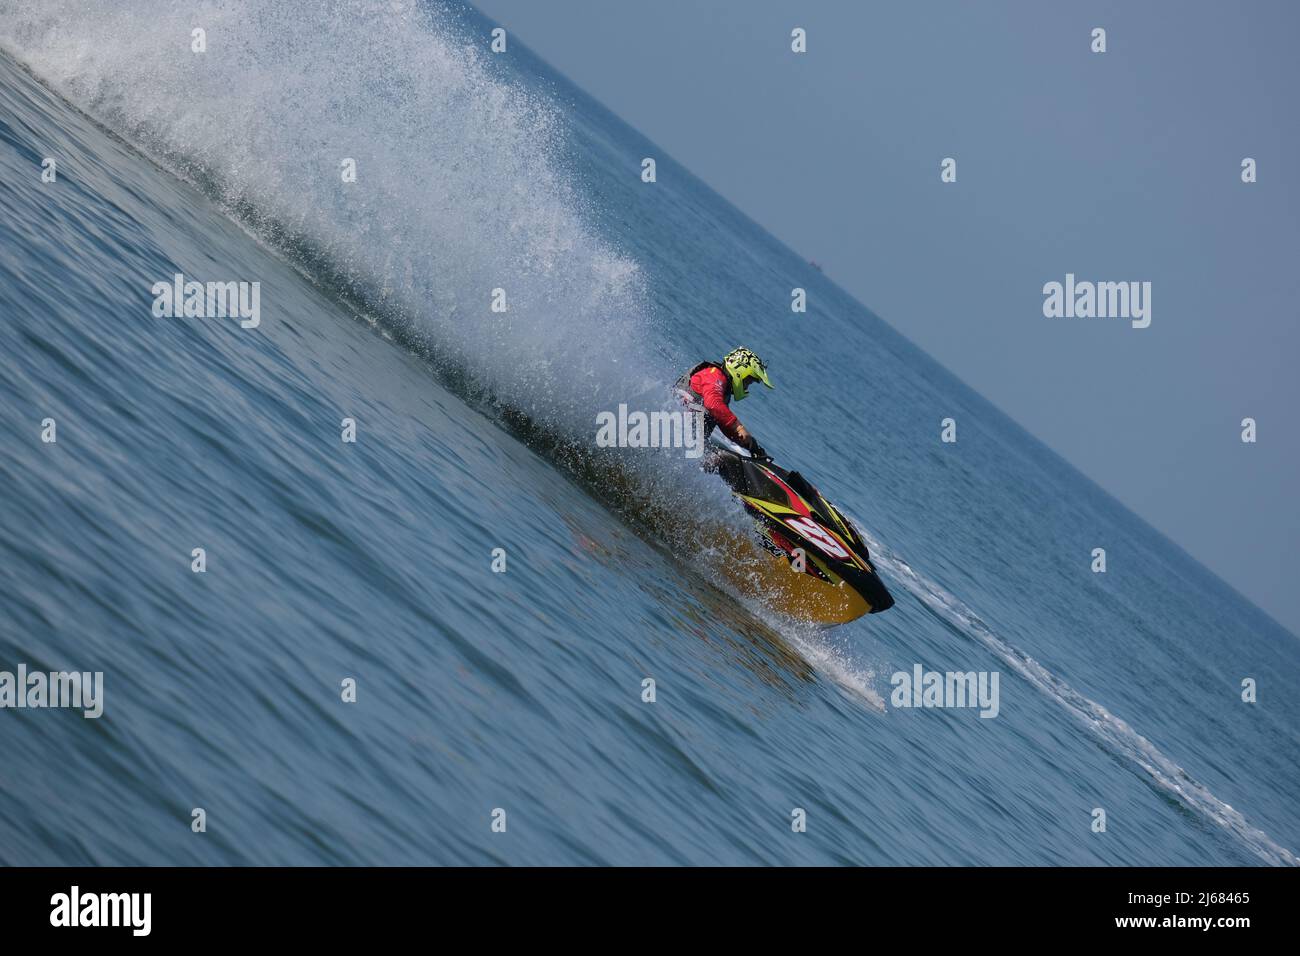 Jet ski is flying fast, making a wall of splashes Stock Photo